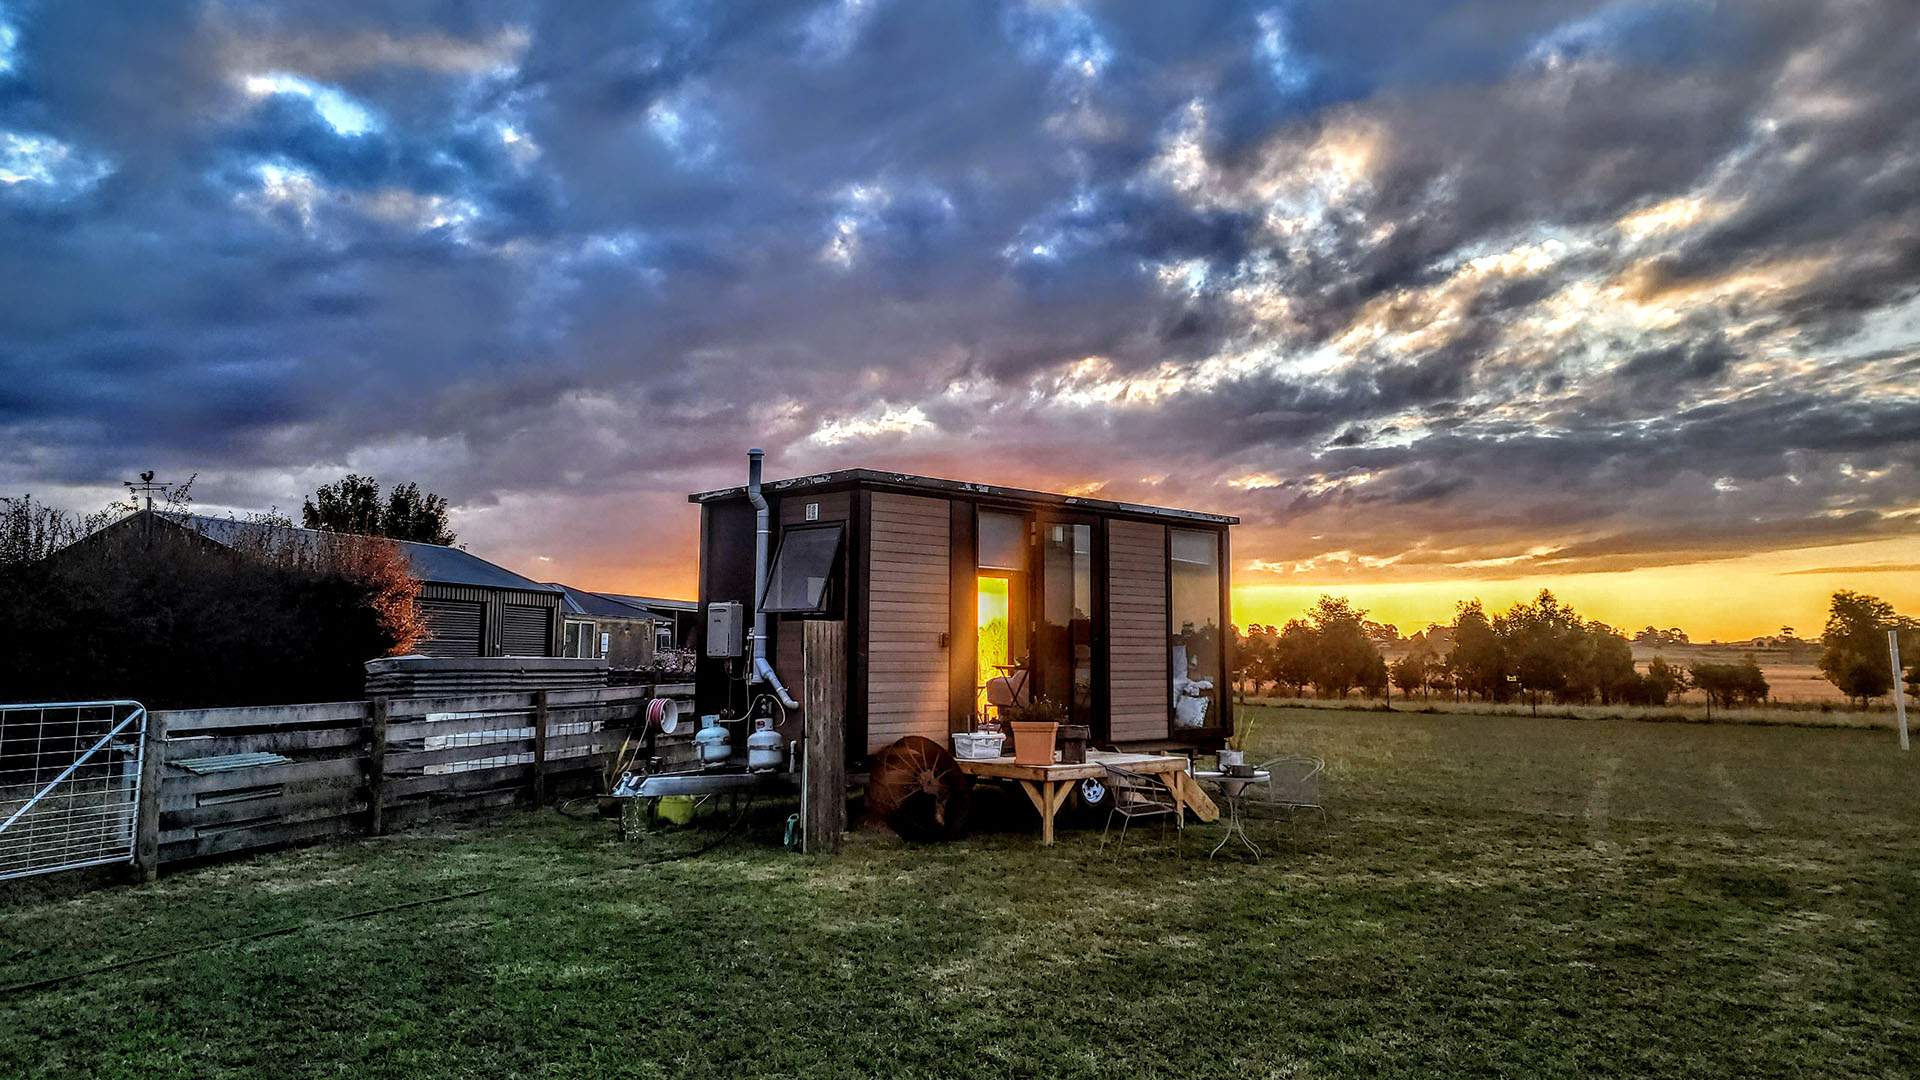 Tiny Away Has Just Launched Its First Two Tasmanian Tiny Houses for Scenic Apple Isle Getaways